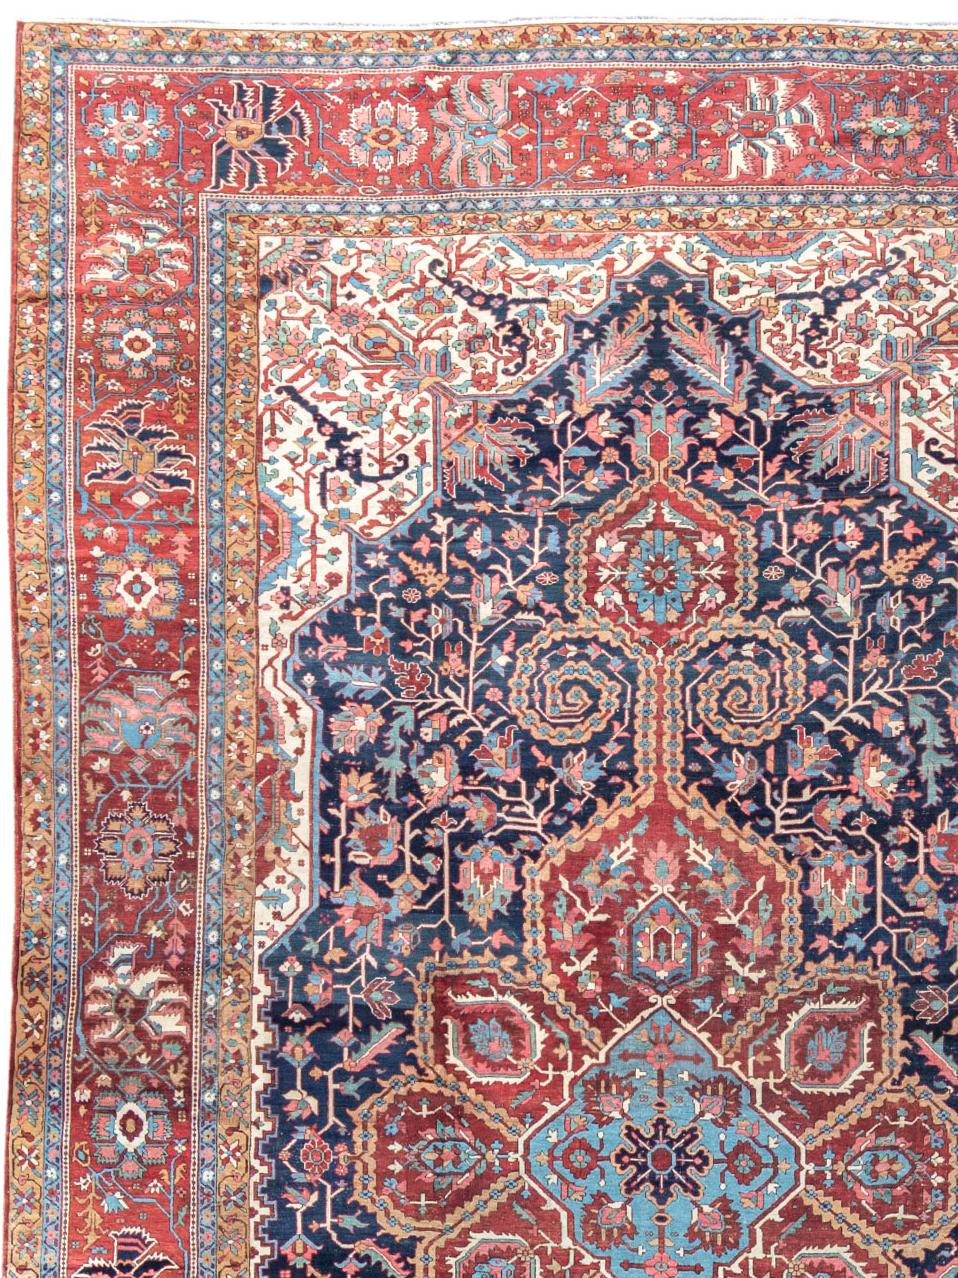 Antique Large Oversized Persian Serapi Carpet, 19th Century

This fantastic oversized Serapi carpet paints a ruby-red lobed medallion against an indigo ground. A network of flowers and full palmettes blossom from meandering scrolls throughout the